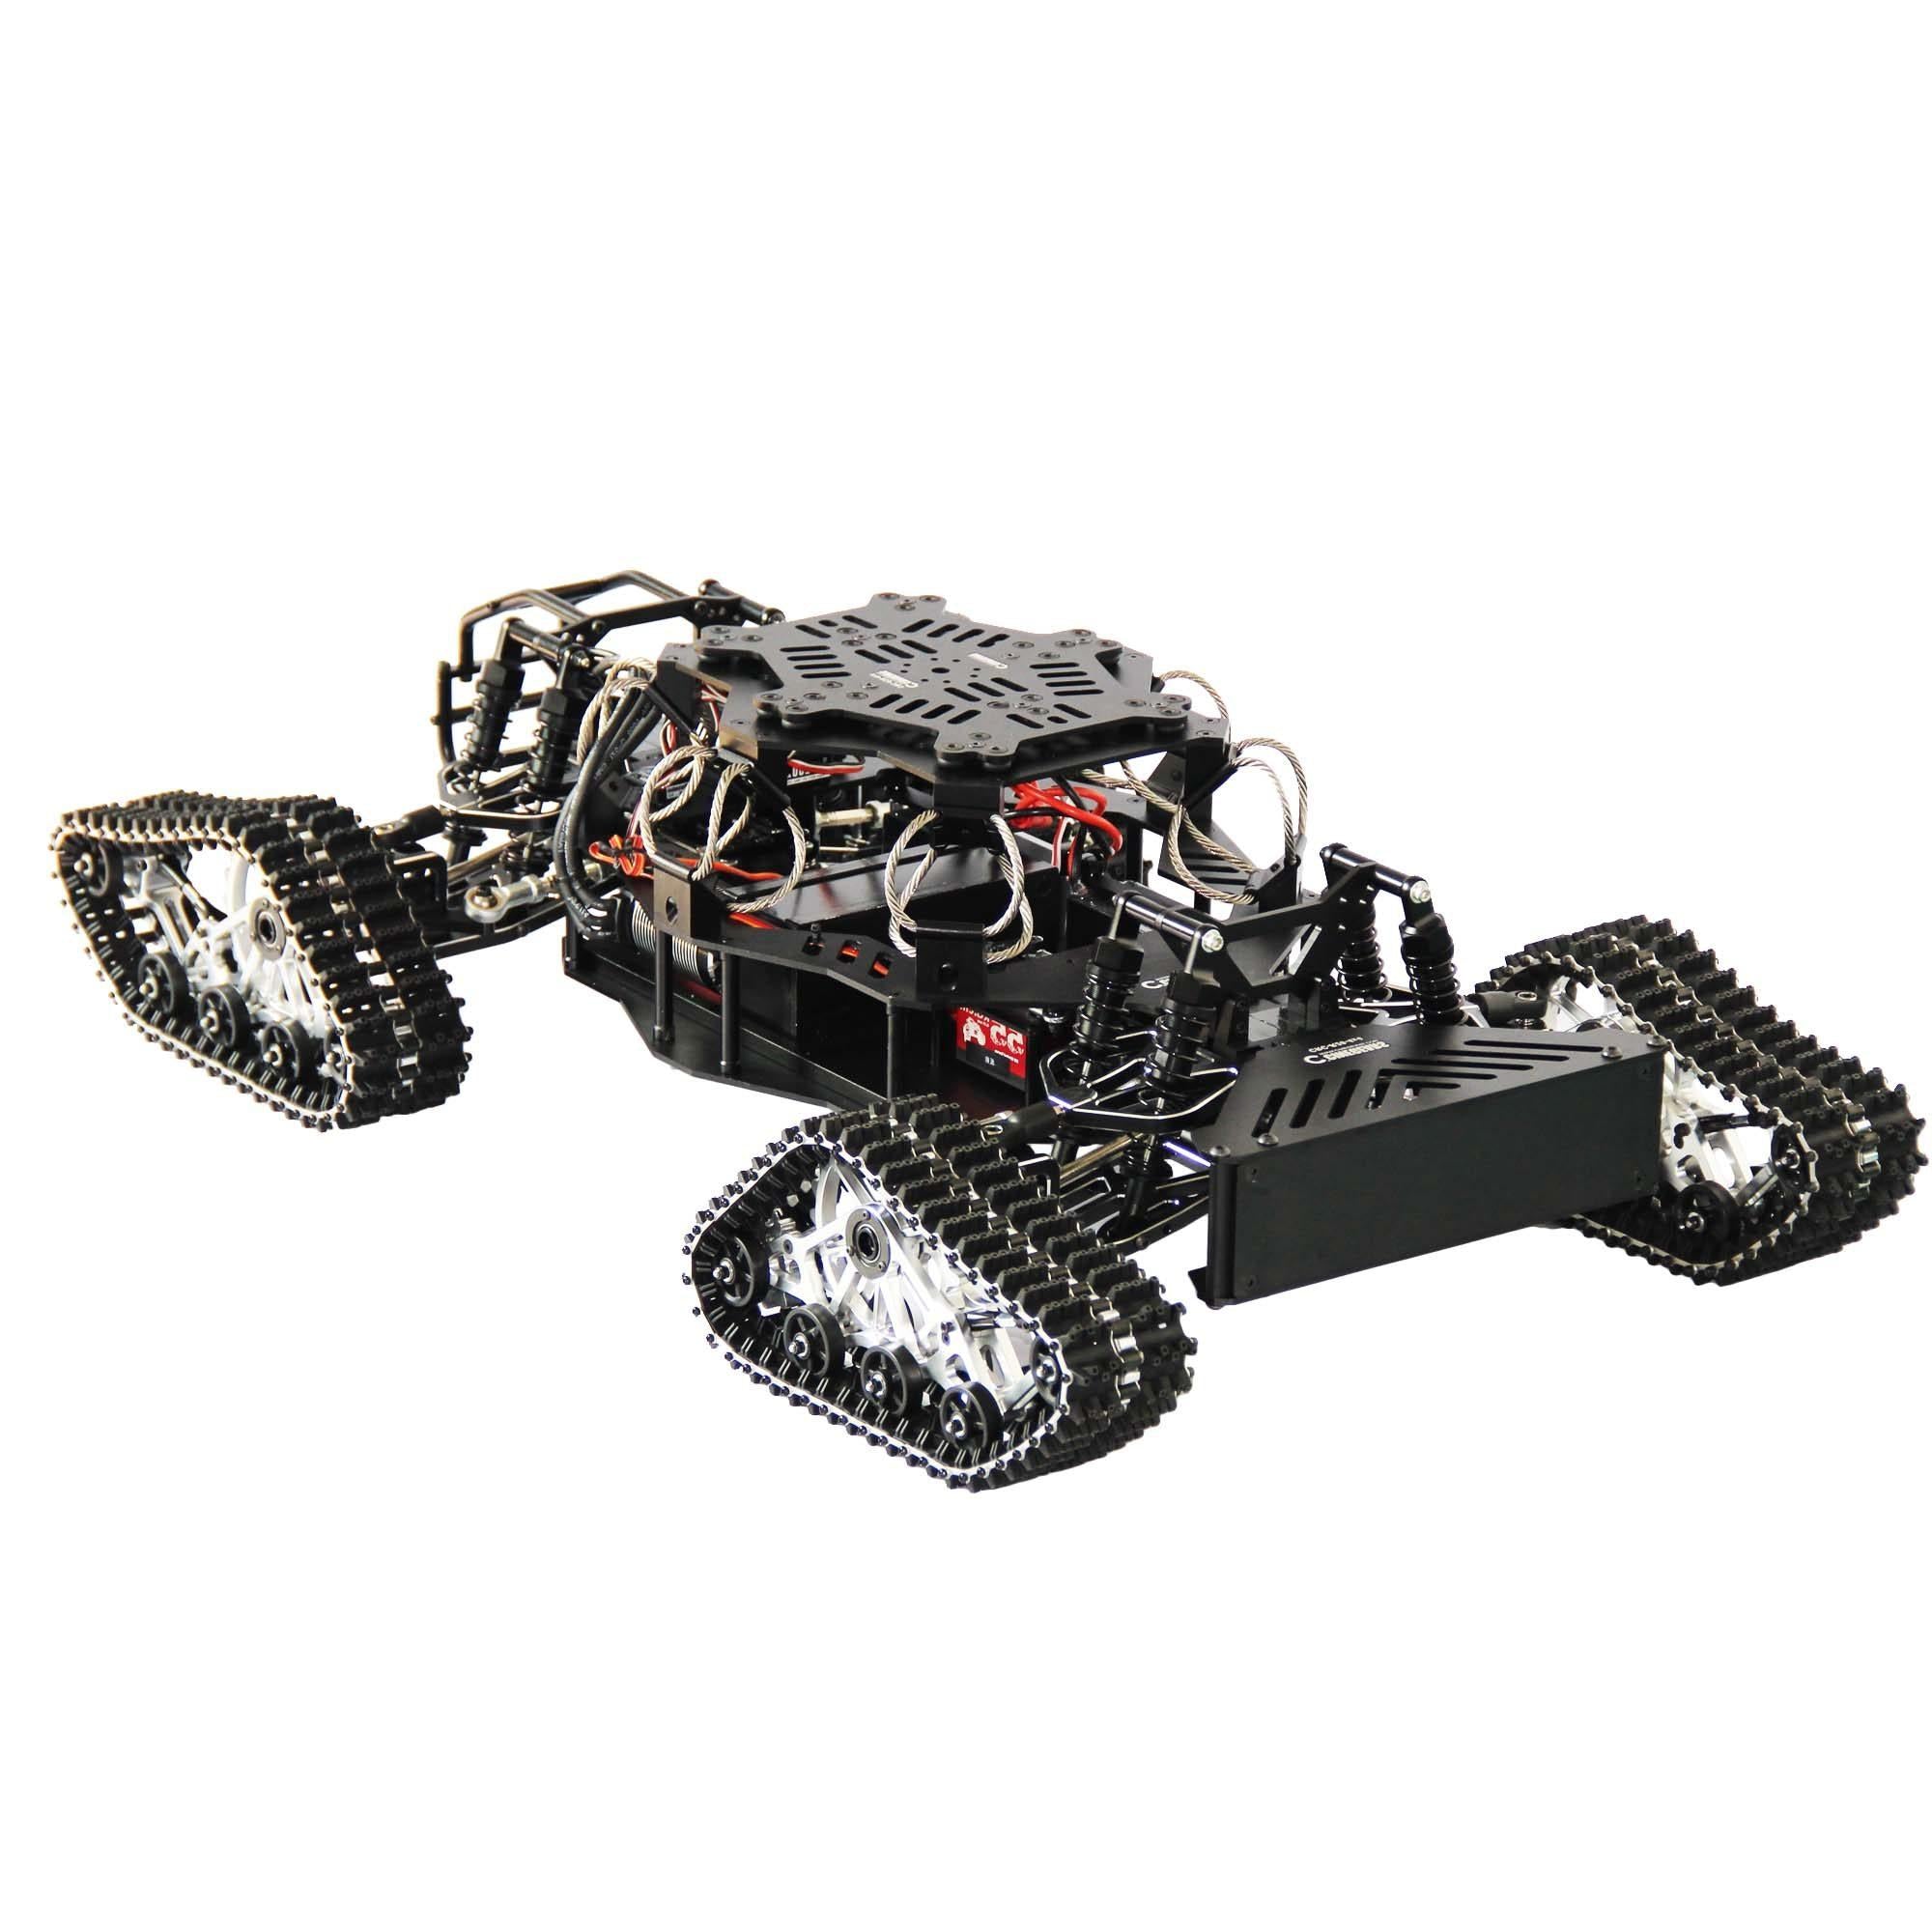 CINE RC 4 × 4 All-Wheel Drive Rover Gimbal Car Package